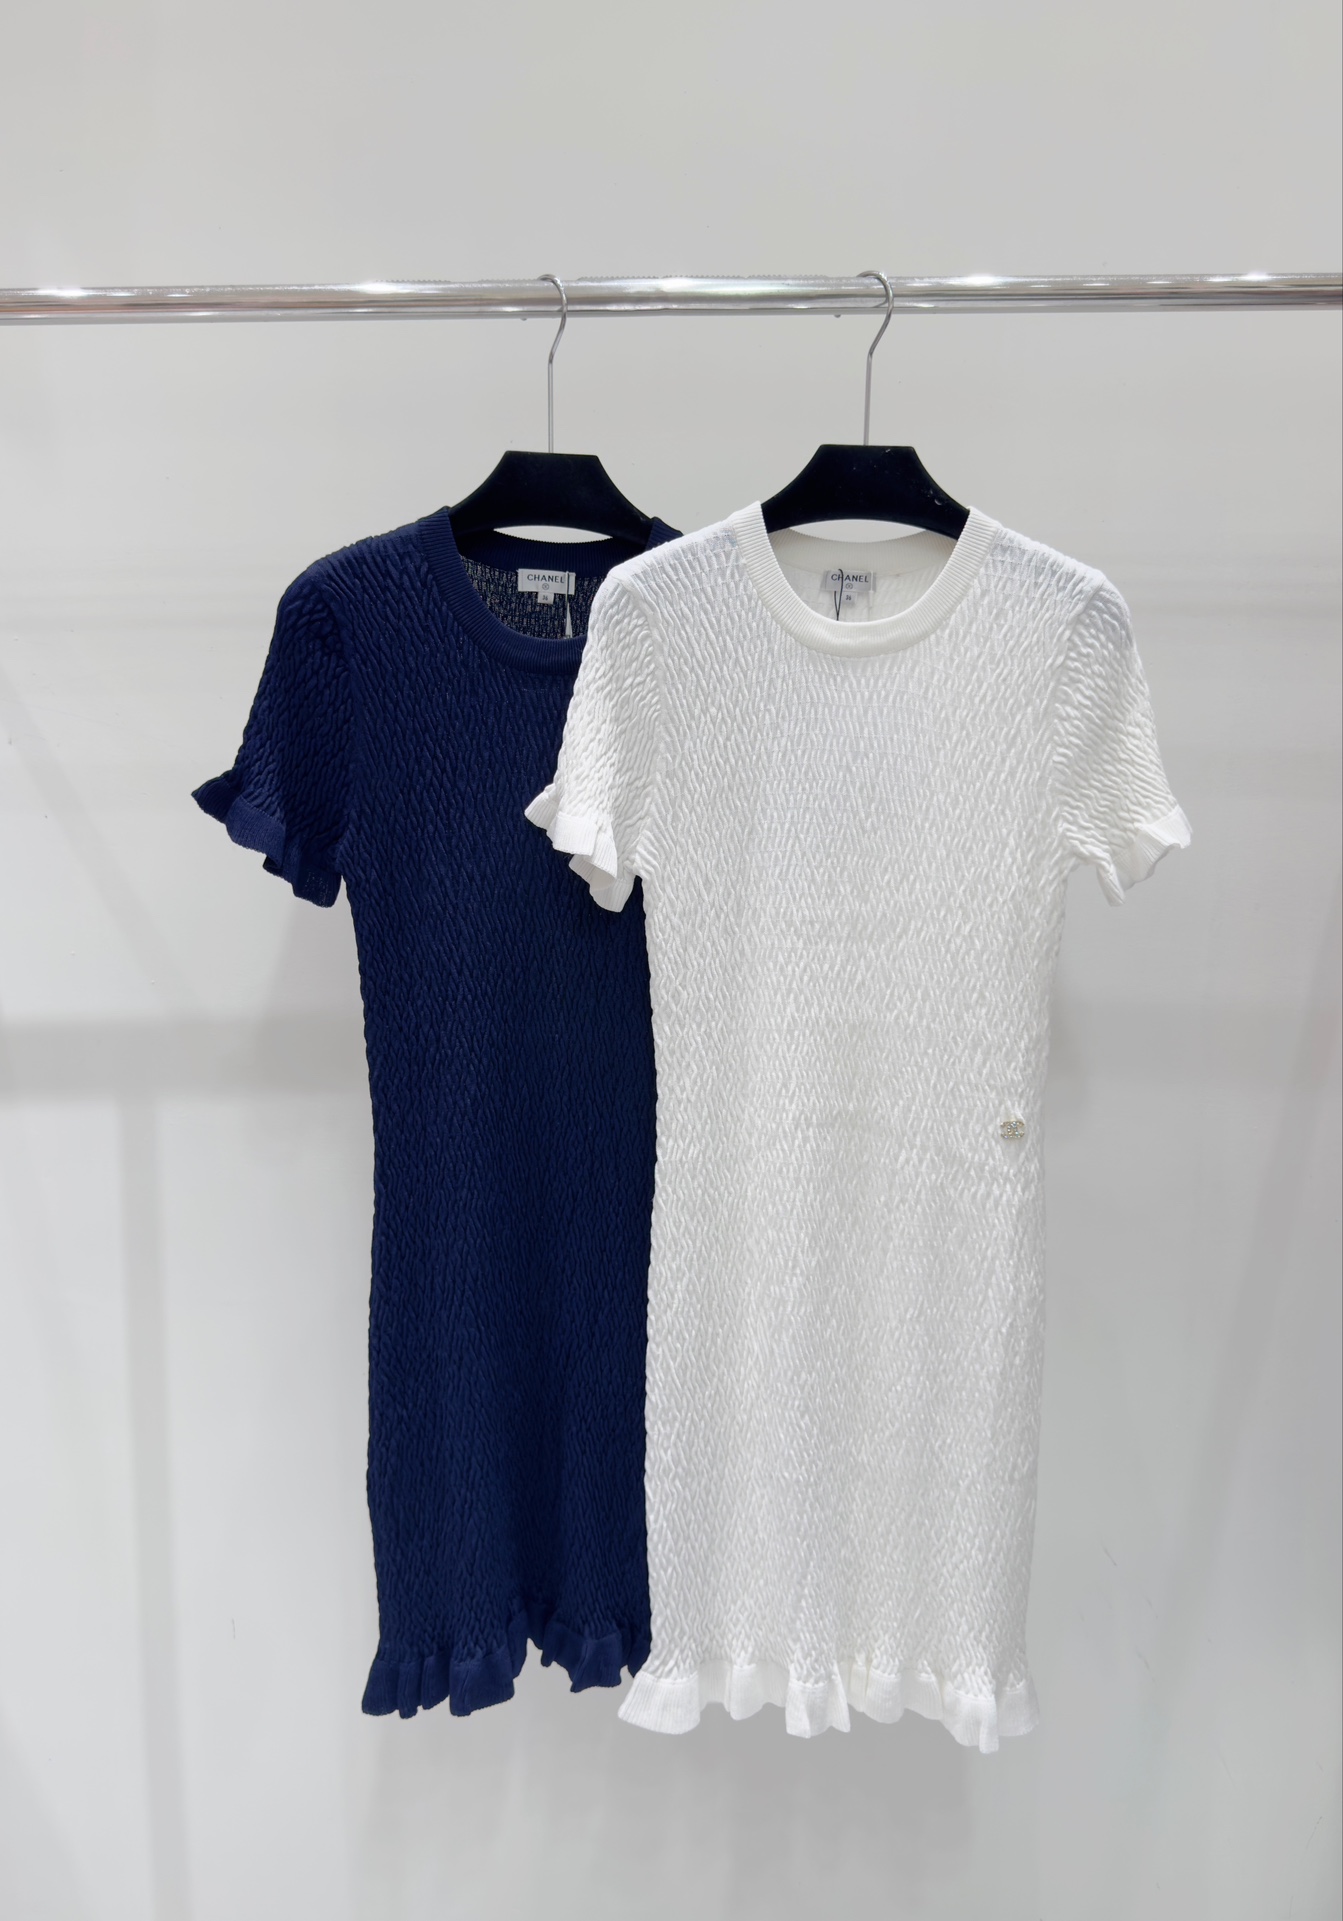 Chanel Clothing Dresses Knitting Spring/Summer Collection